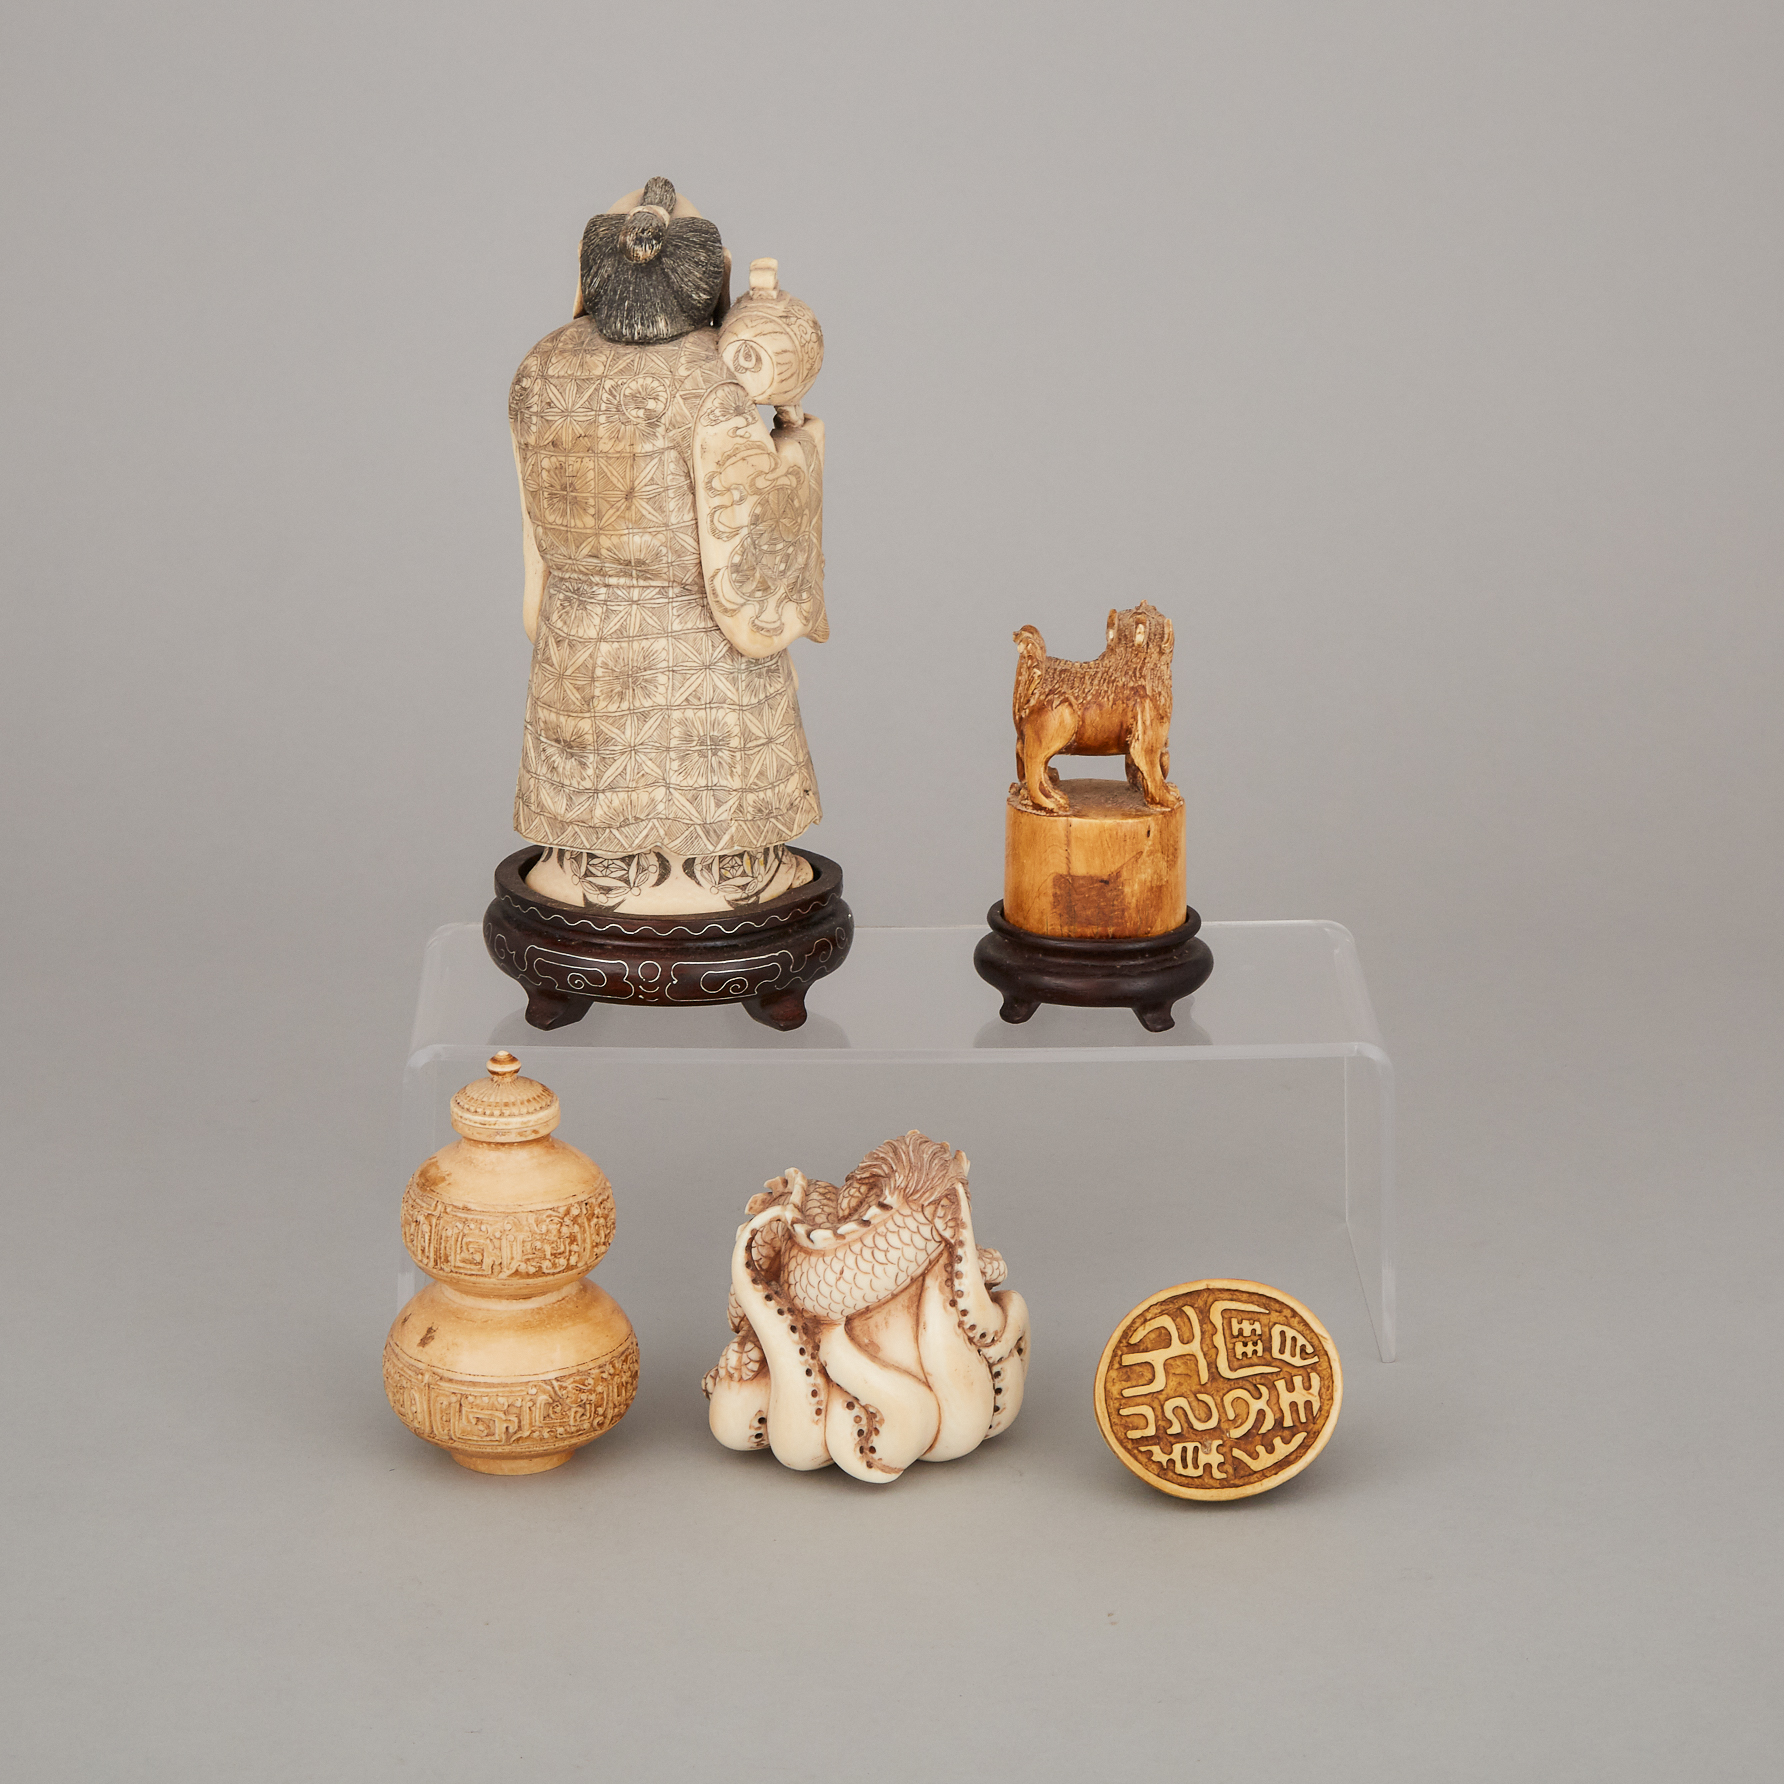 A Group of Five Ivory Carved Items, Early 20th Century